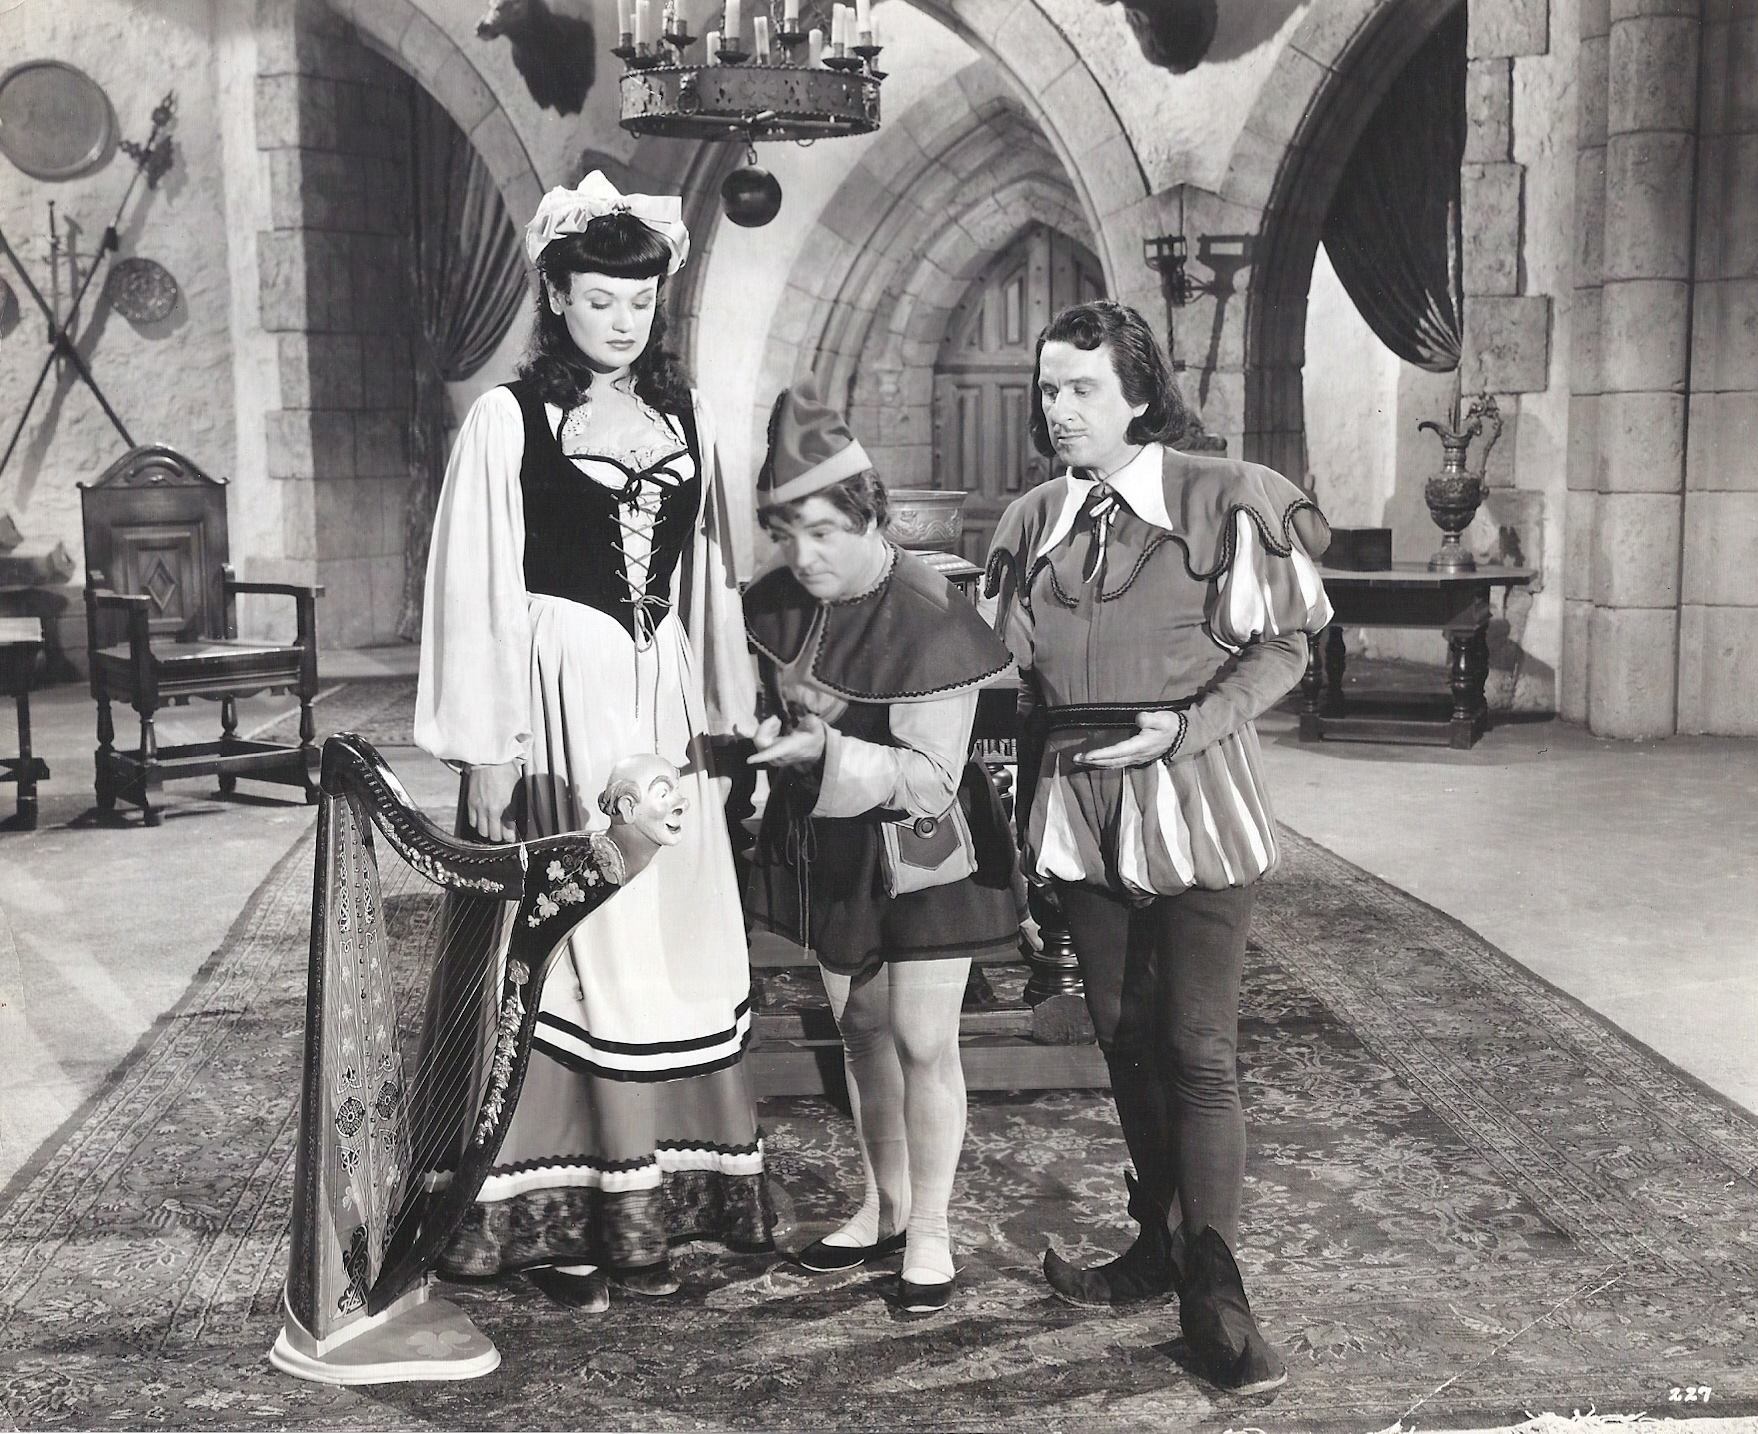 Dorothy Ford - Bud Abbott - Lou Costello (Jack and the beanstalk) 1952